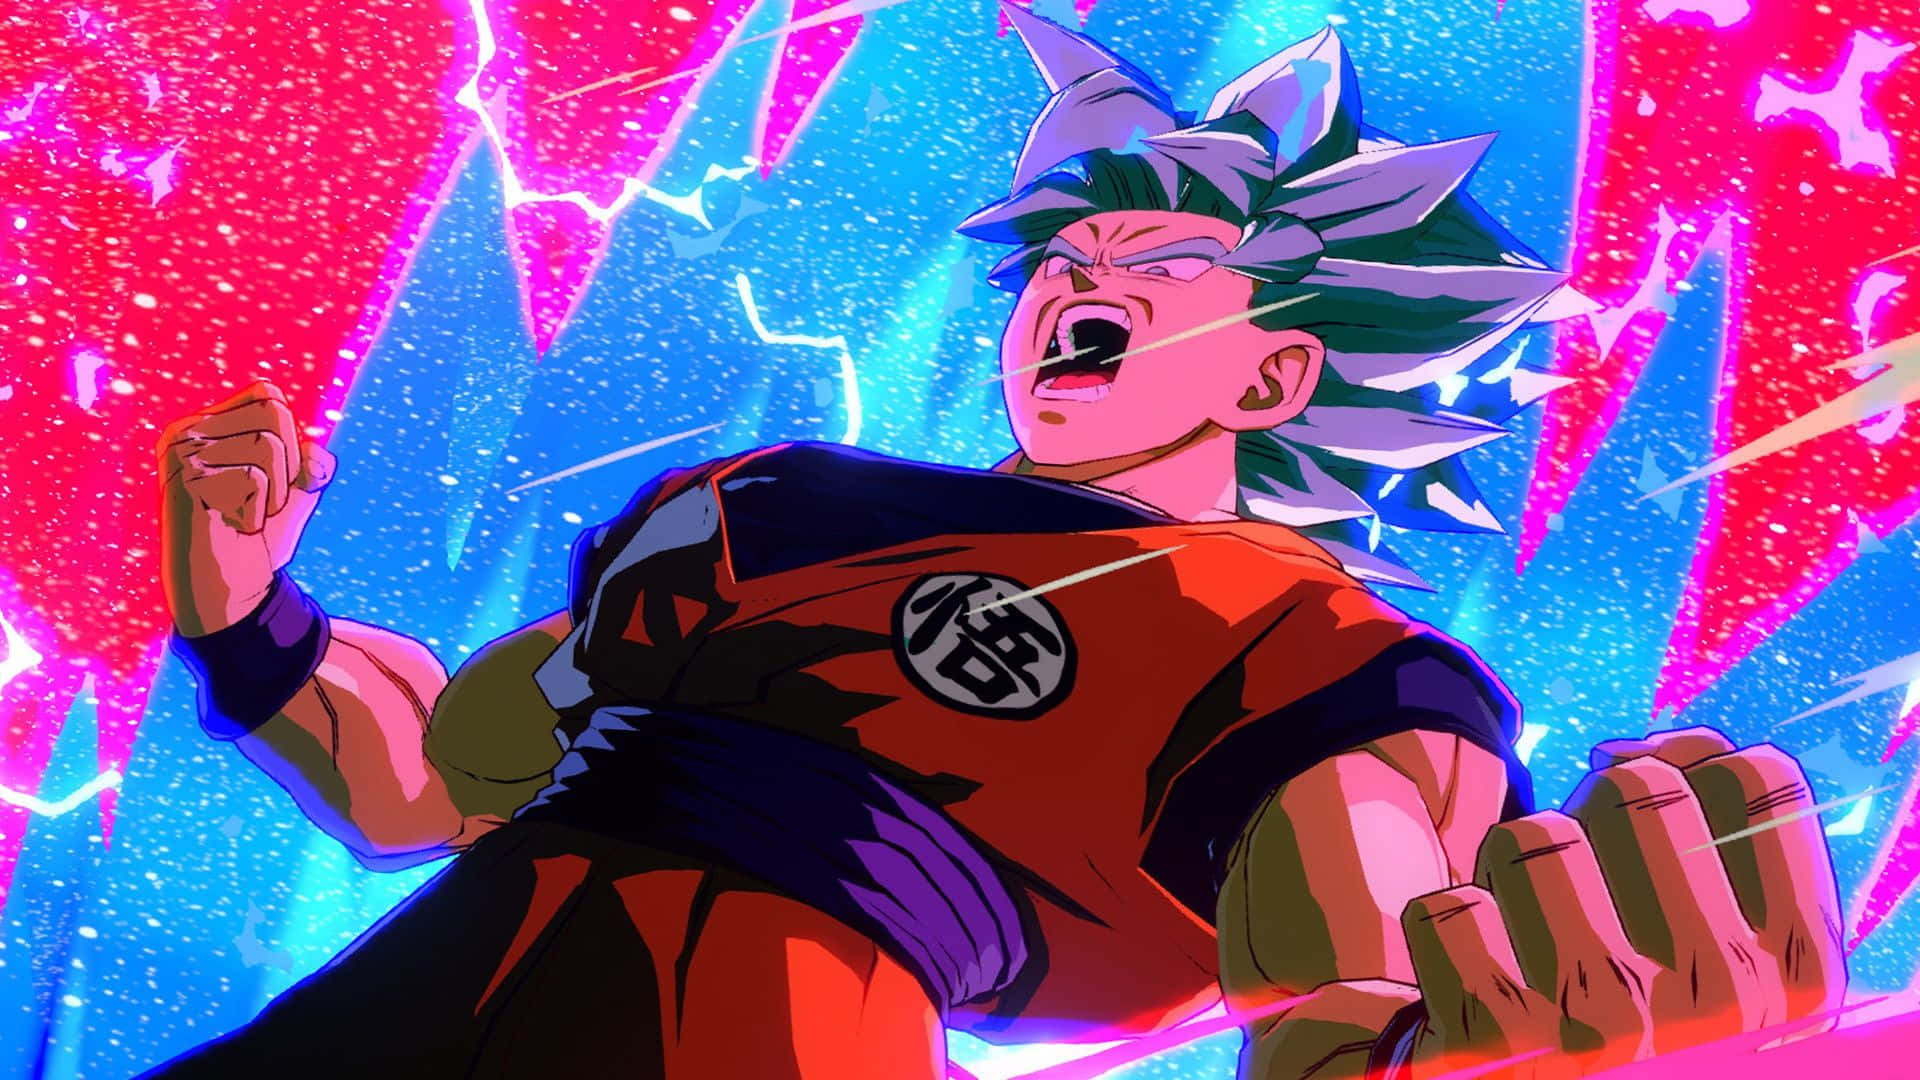 Experience lightning fast action in Dragon Ball FighterZ Wallpaper